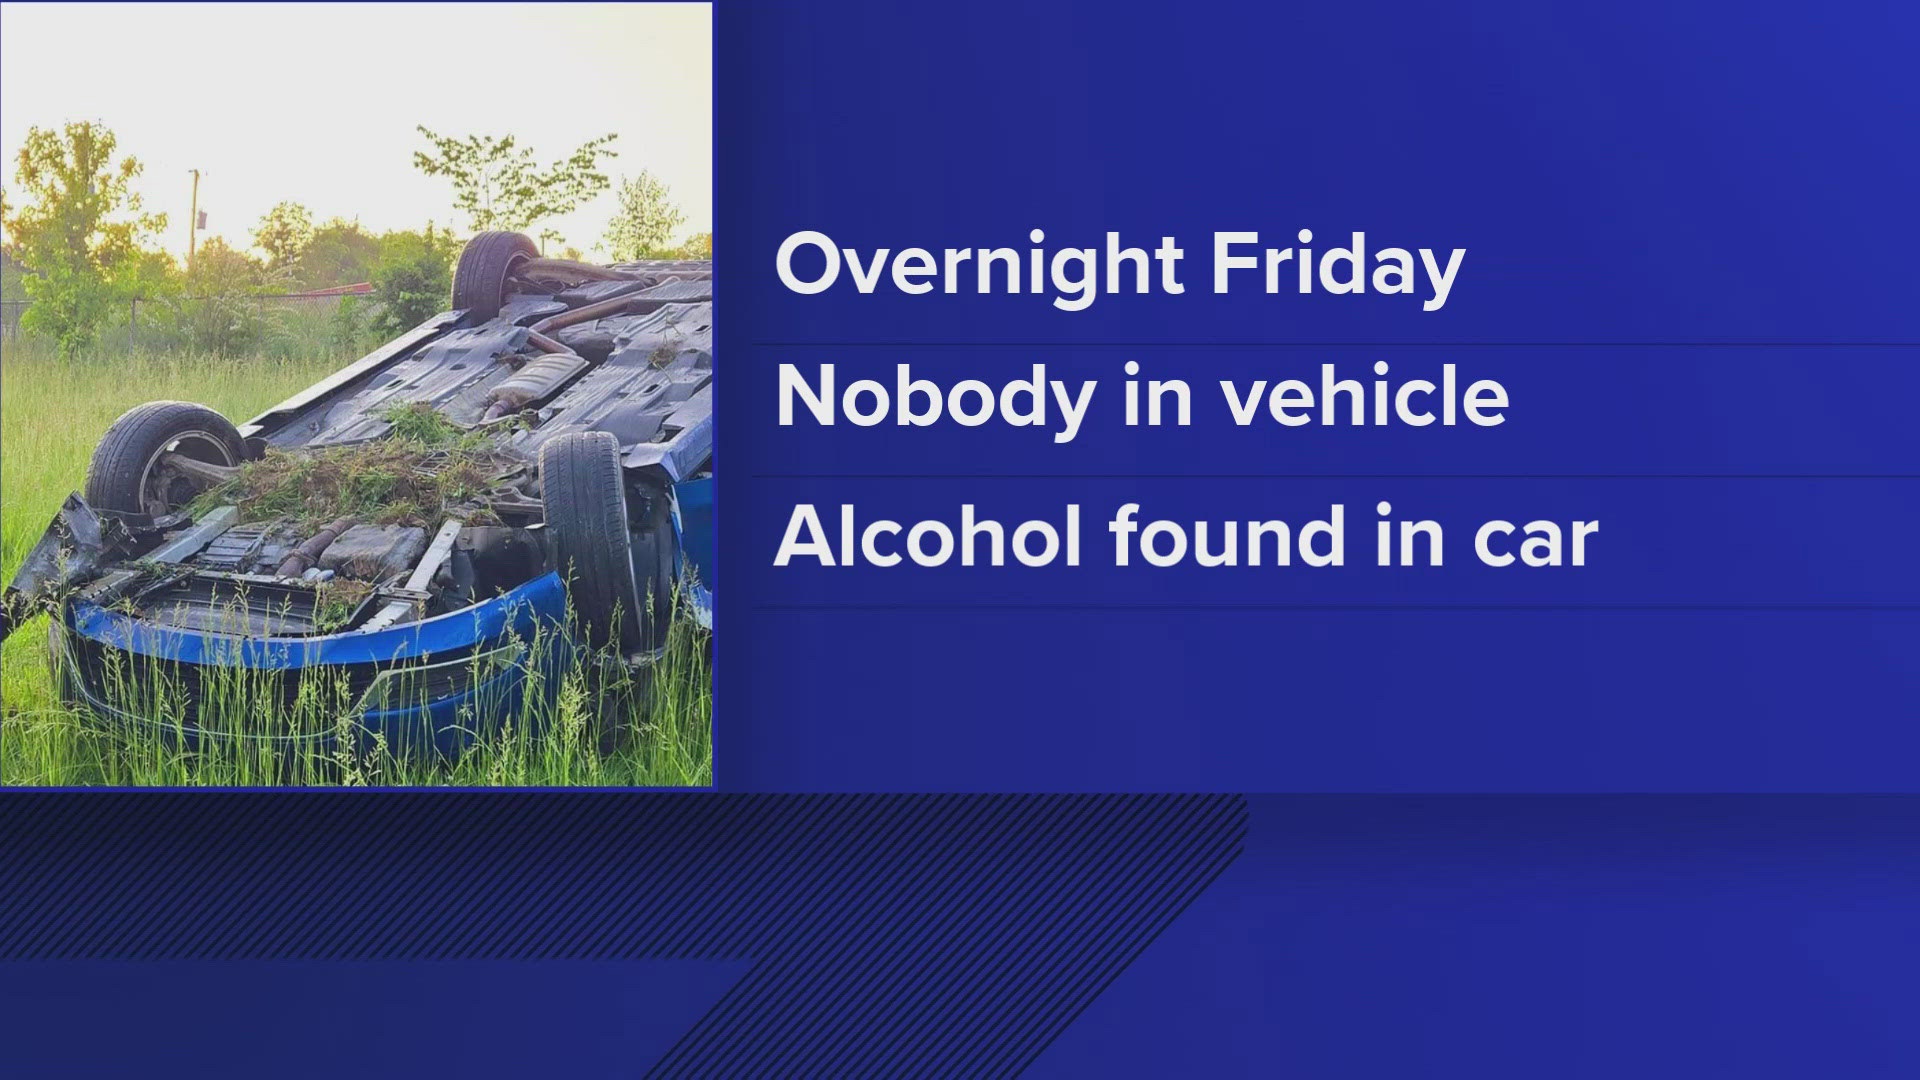 The Knoxville Police Department said nobody was found in the vehicle, but there were signs that alcohol was involved.